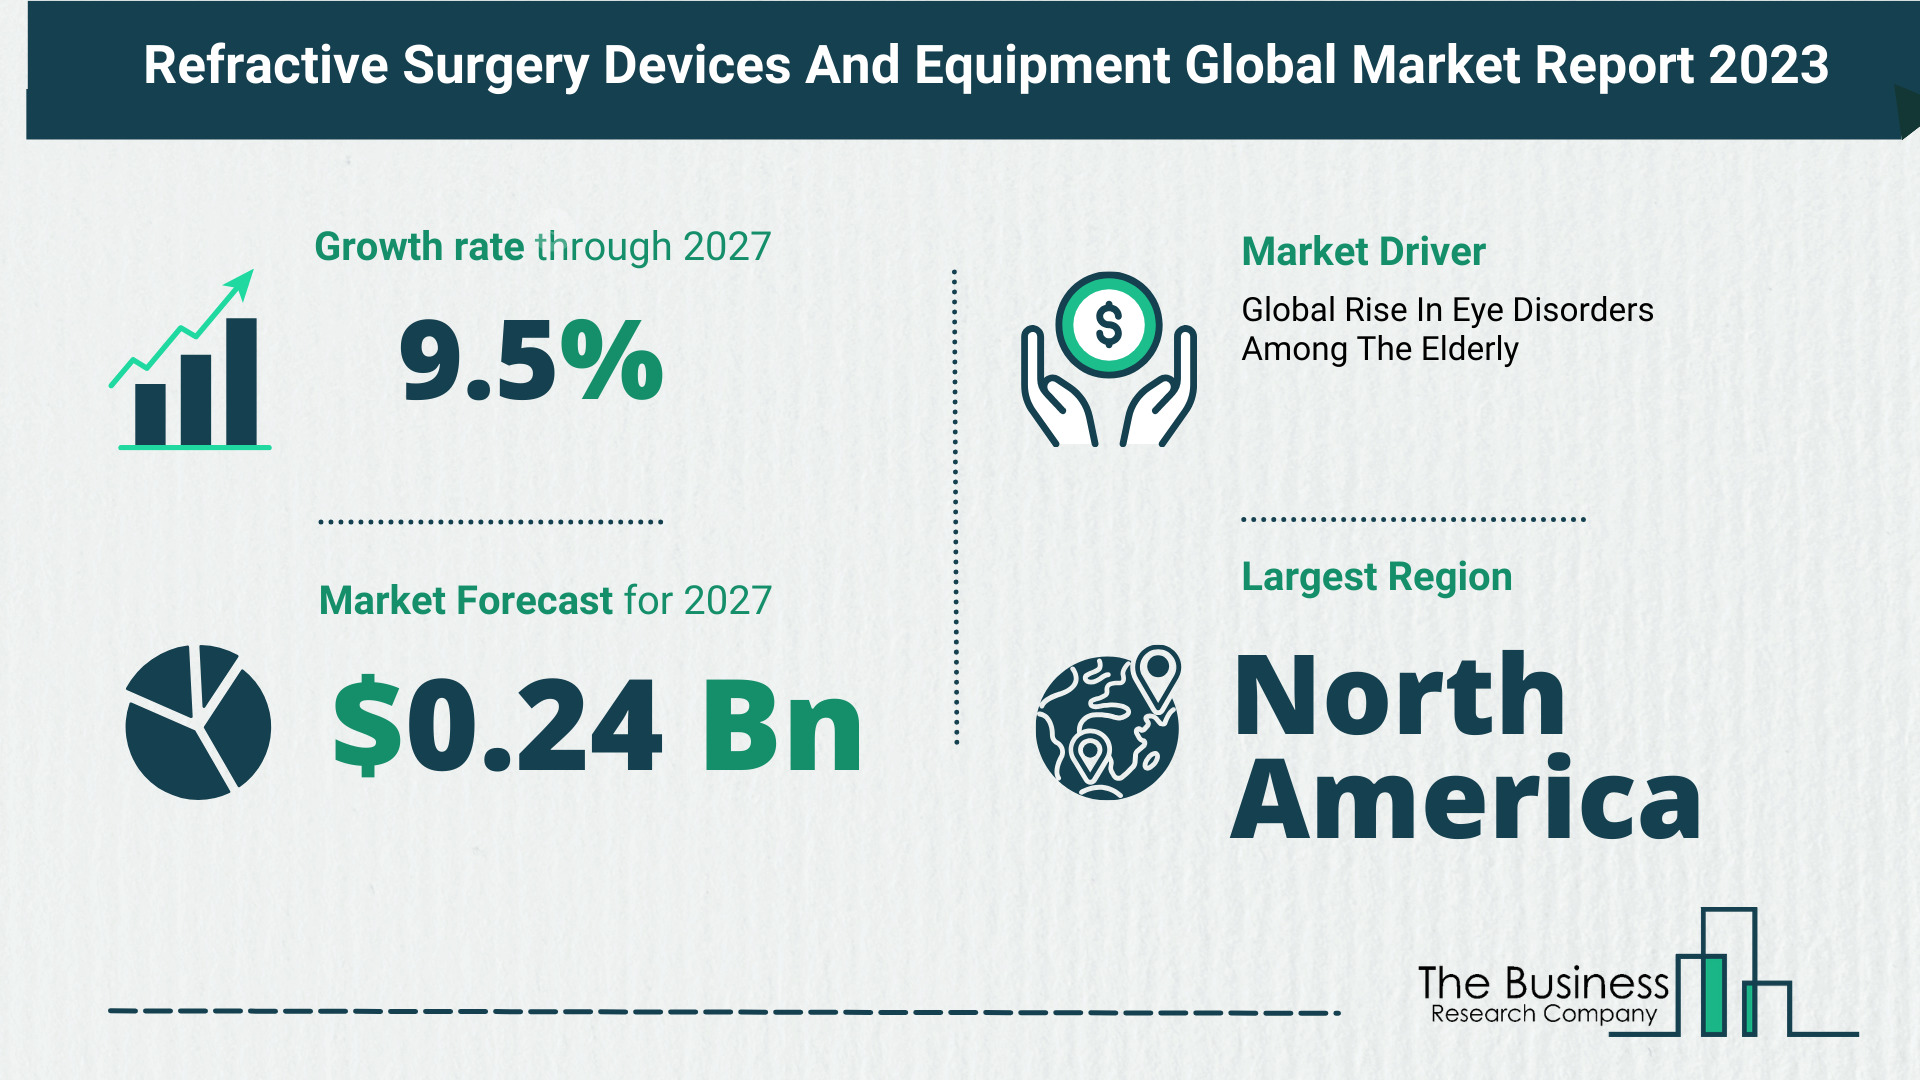 Overview Of The Refractive Surgery Devices And Equipment Market 2023: Size, Drivers, And Trends